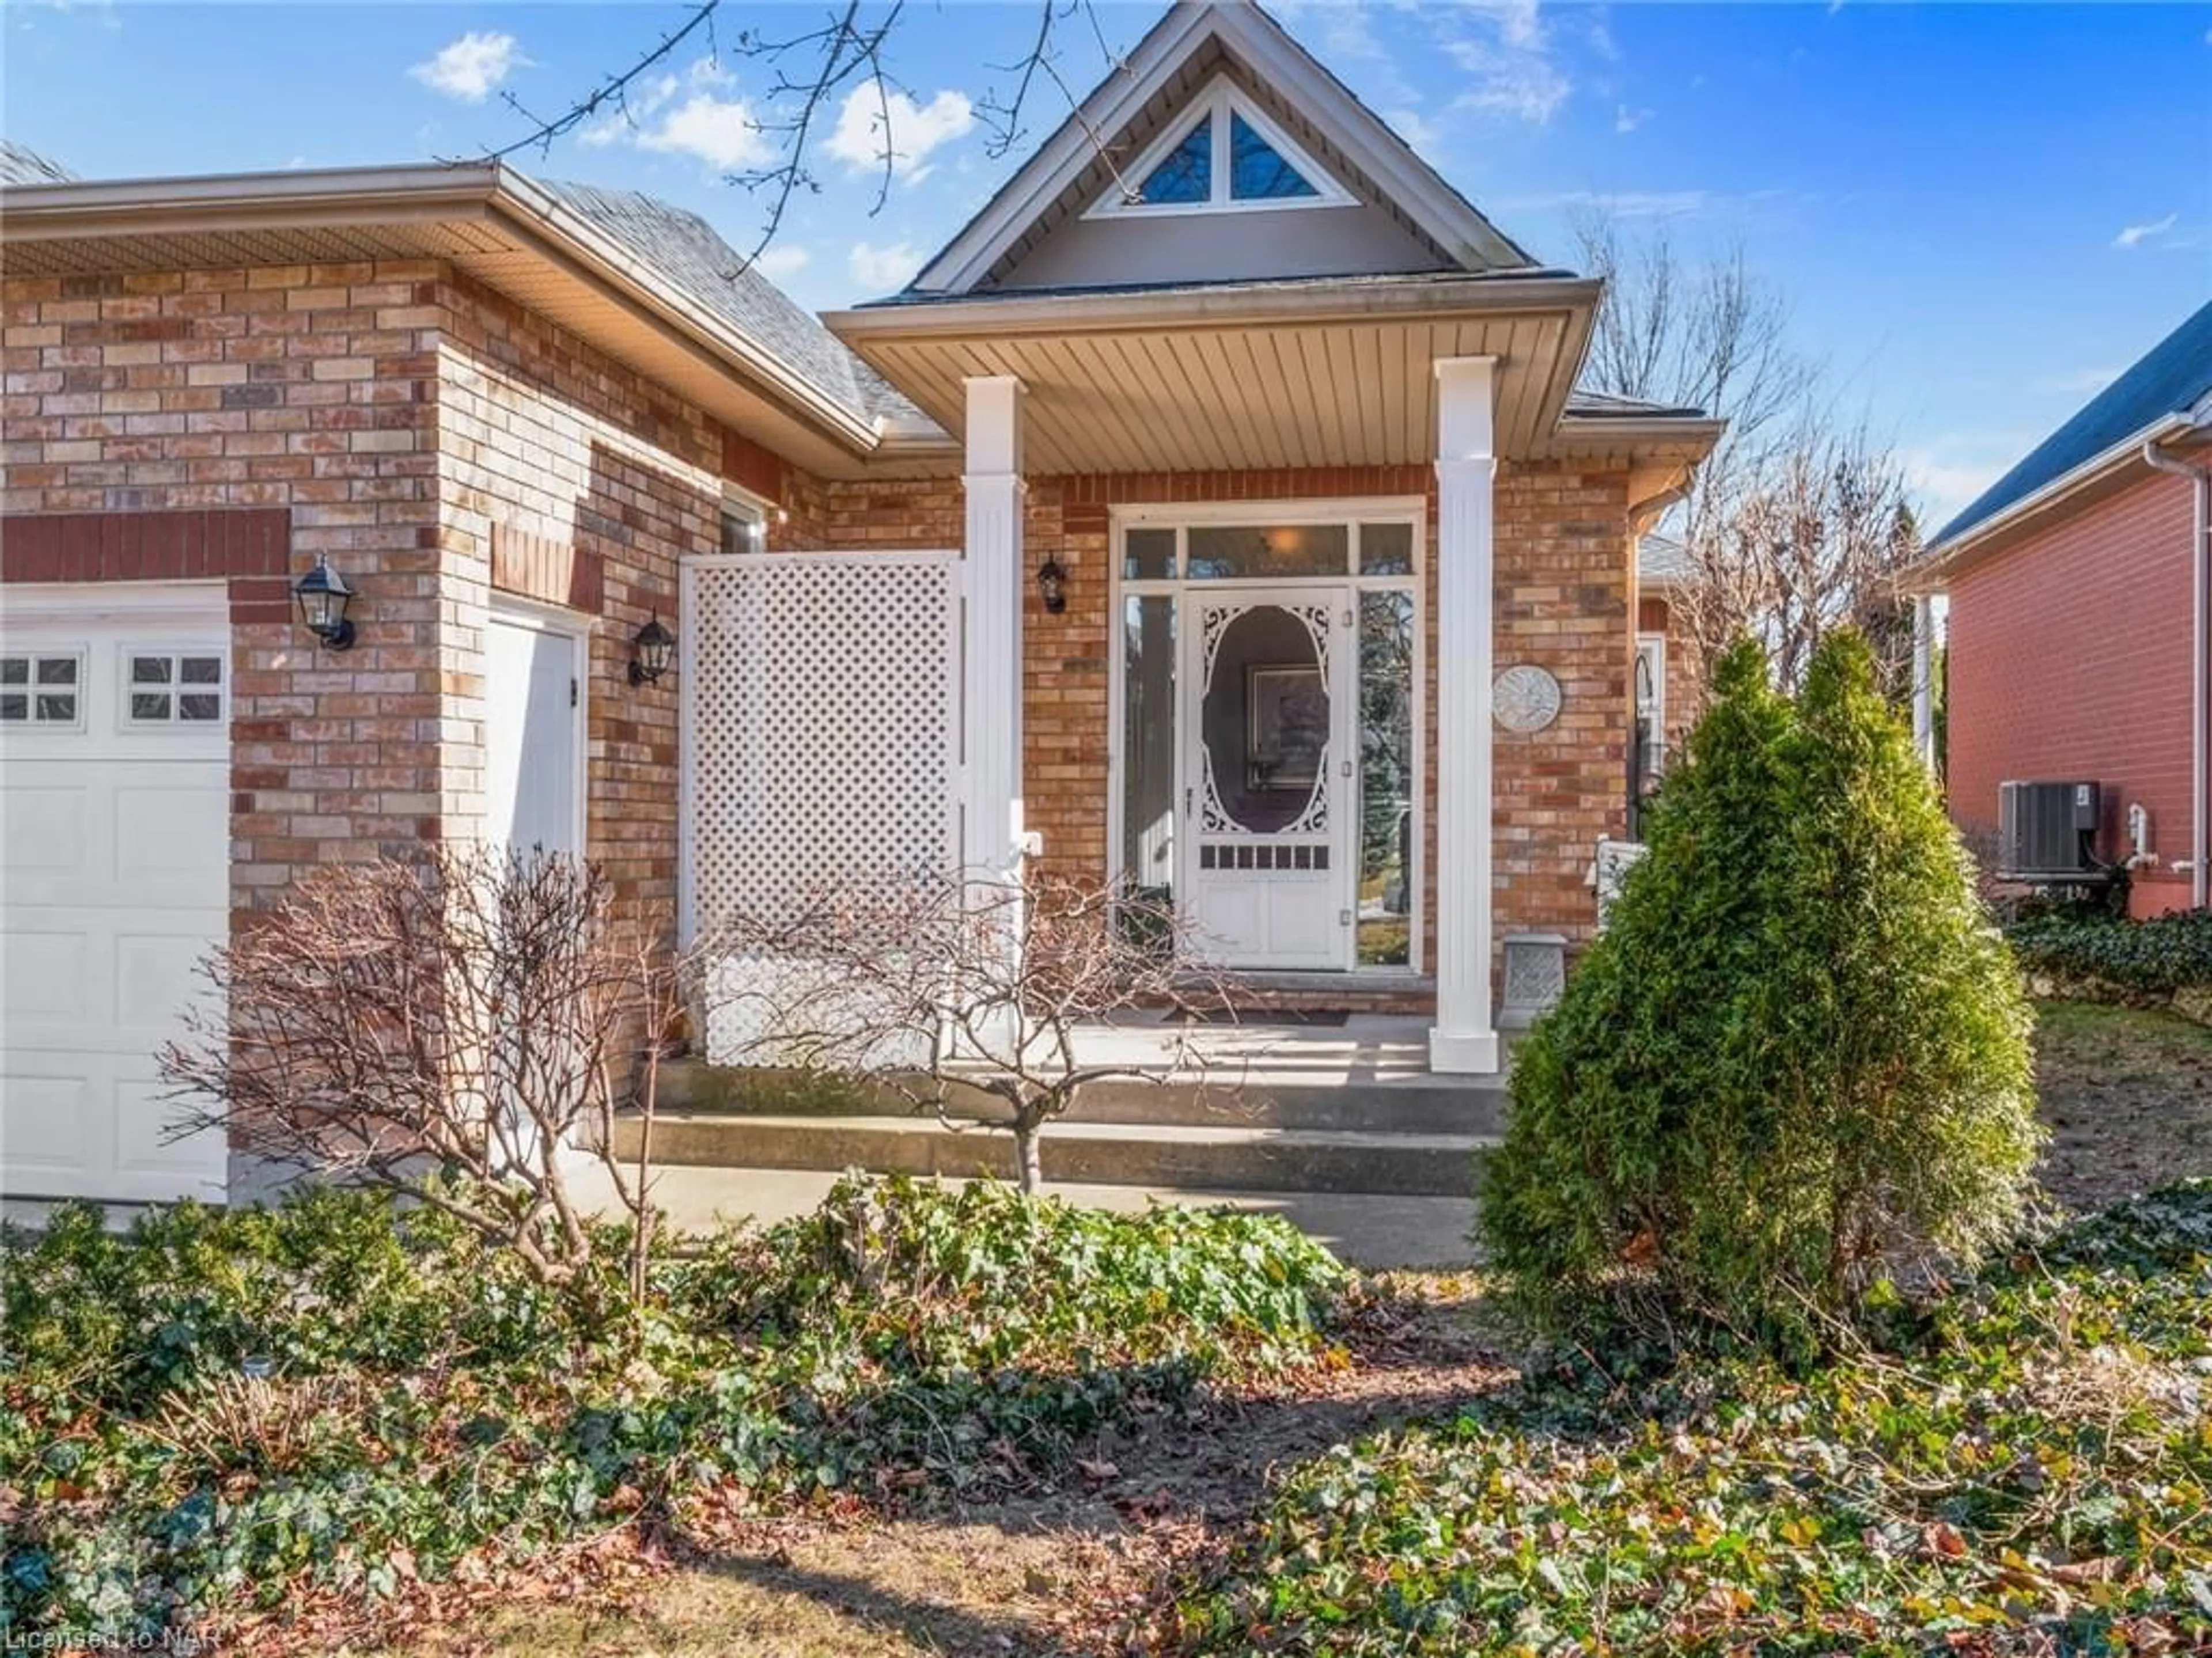 Home with brick exterior material for 2290 Stonehaven Ave, Niagara Falls Ontario L2J 4K1